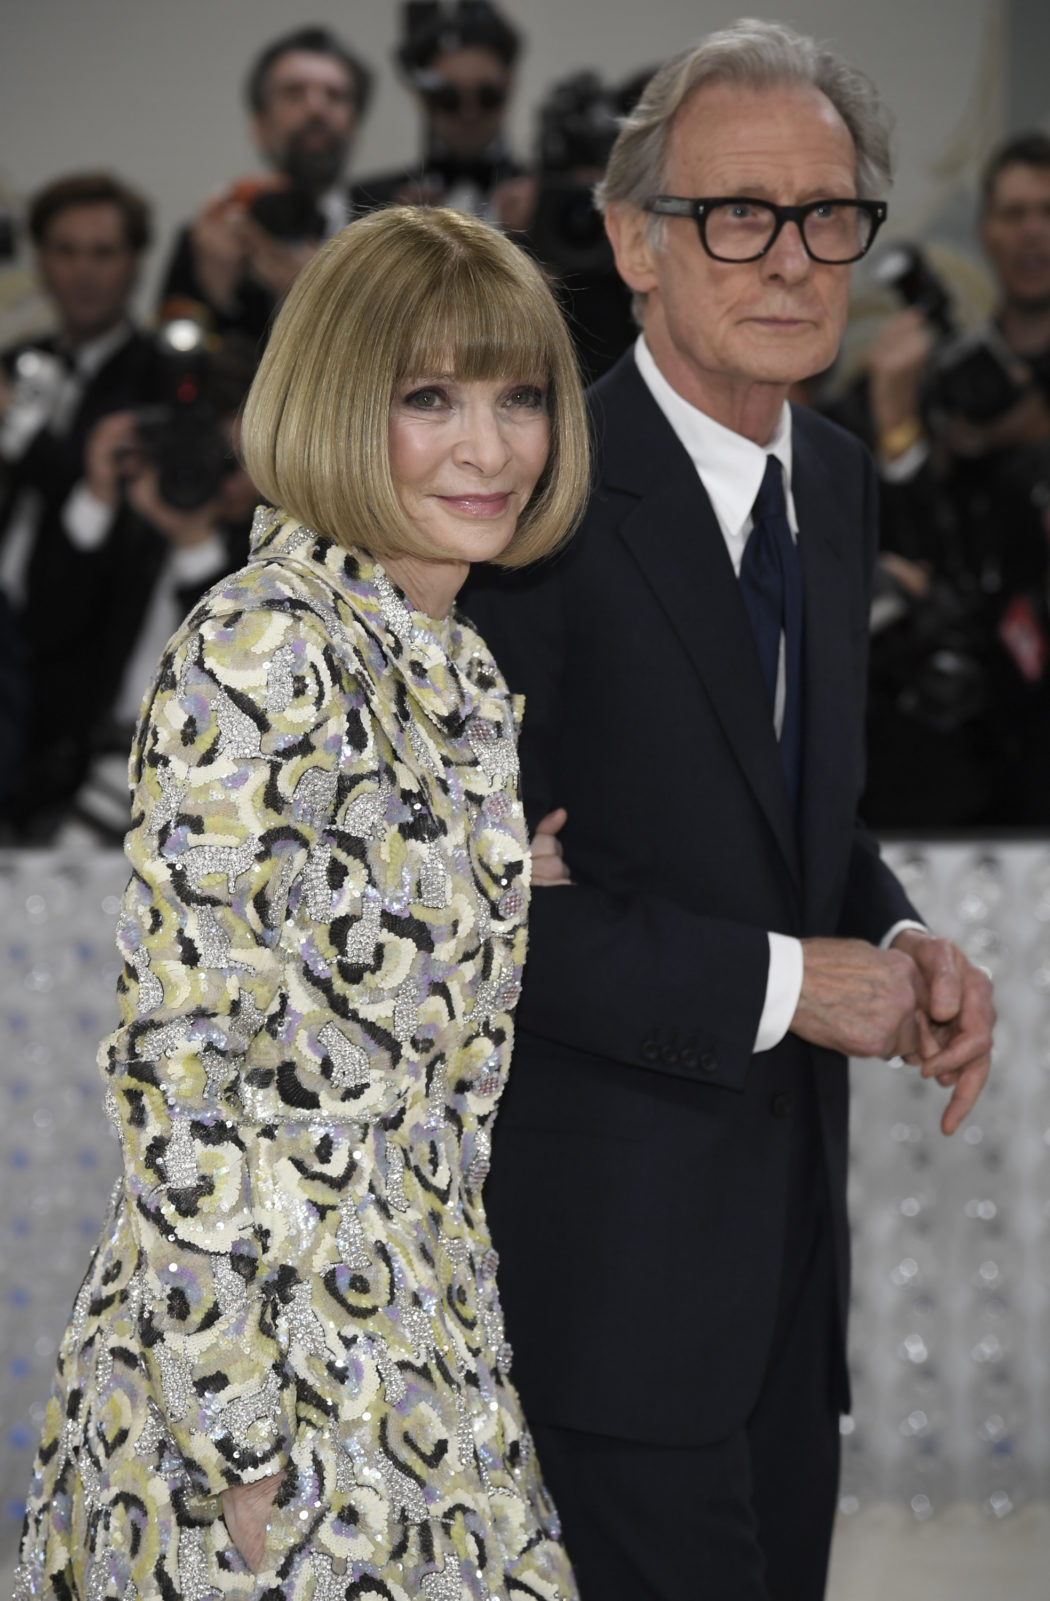 Anna Wintour, left, and Bill Nighy attend The Metropolitan Museum of Art’s Costume Institute benefit gala celebrating the opening of the “Karl Lagerfeld: A Line of Beauty” exhibition on Monday, May 1, 2023, in New York. (Photo by Evan Agostini/Invision/AP)

Associated Press/LaPresse
Only Italy and Spain